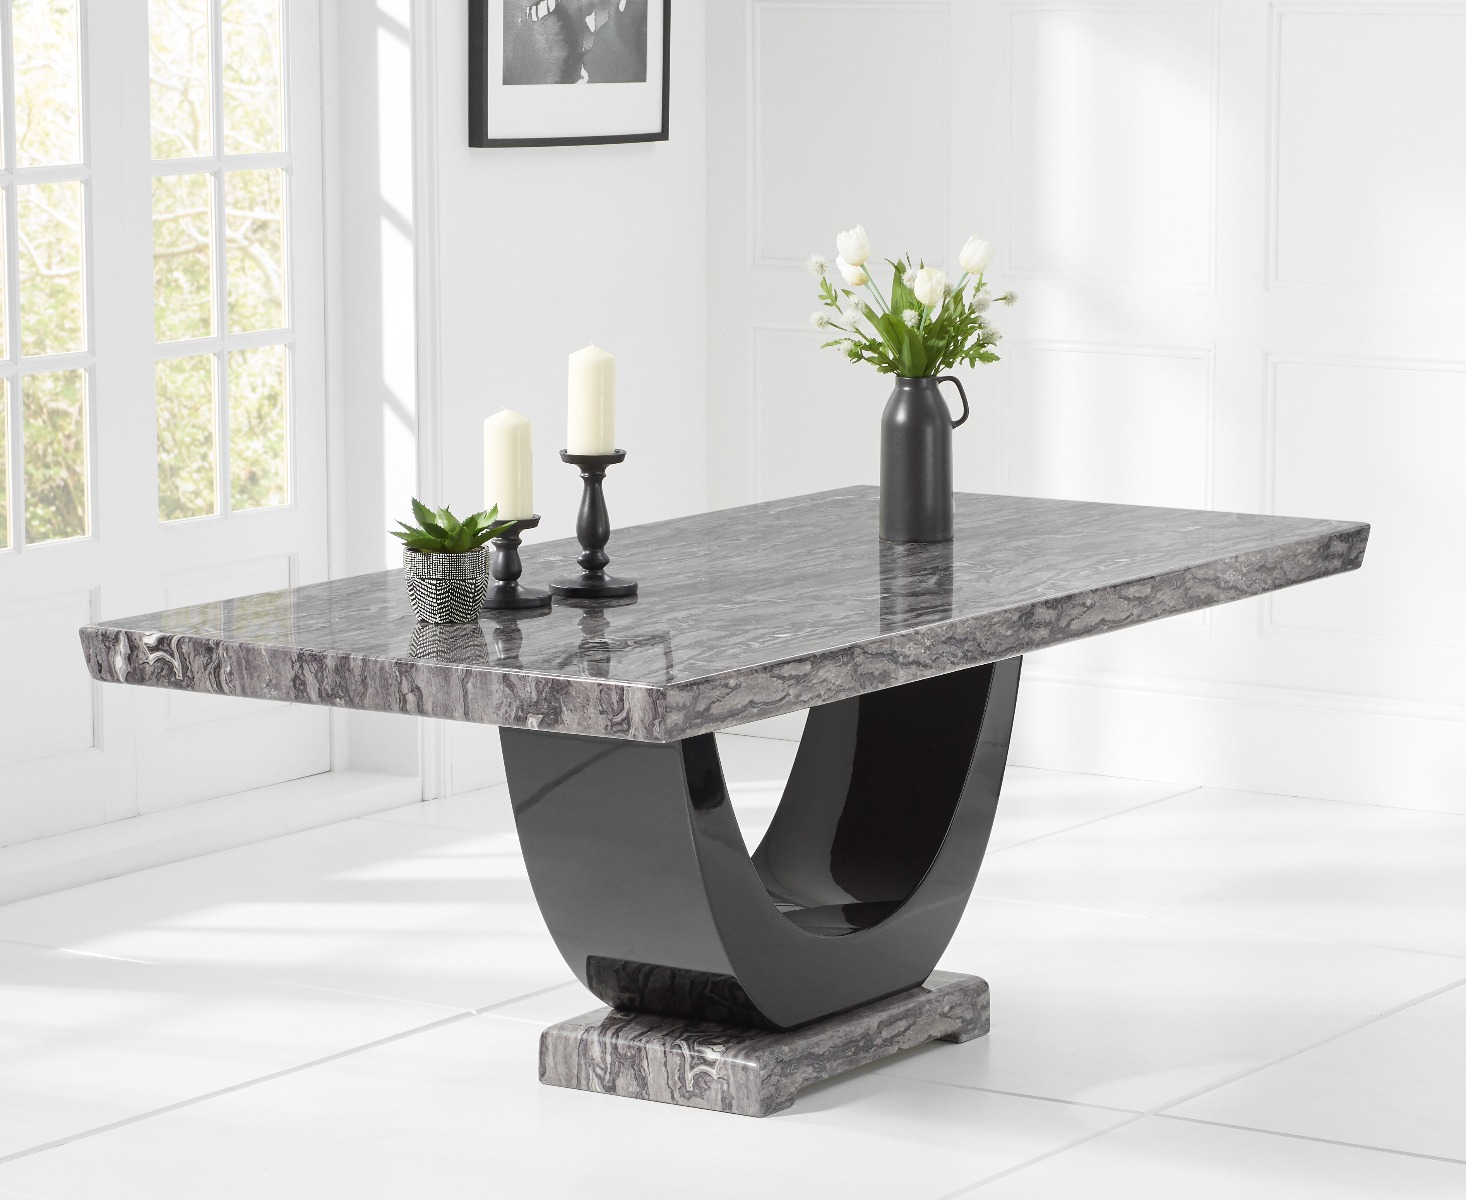 Photo 2 of Raphael 200cm dark grey pedestal marble dining table with 8 grey sophia chairs